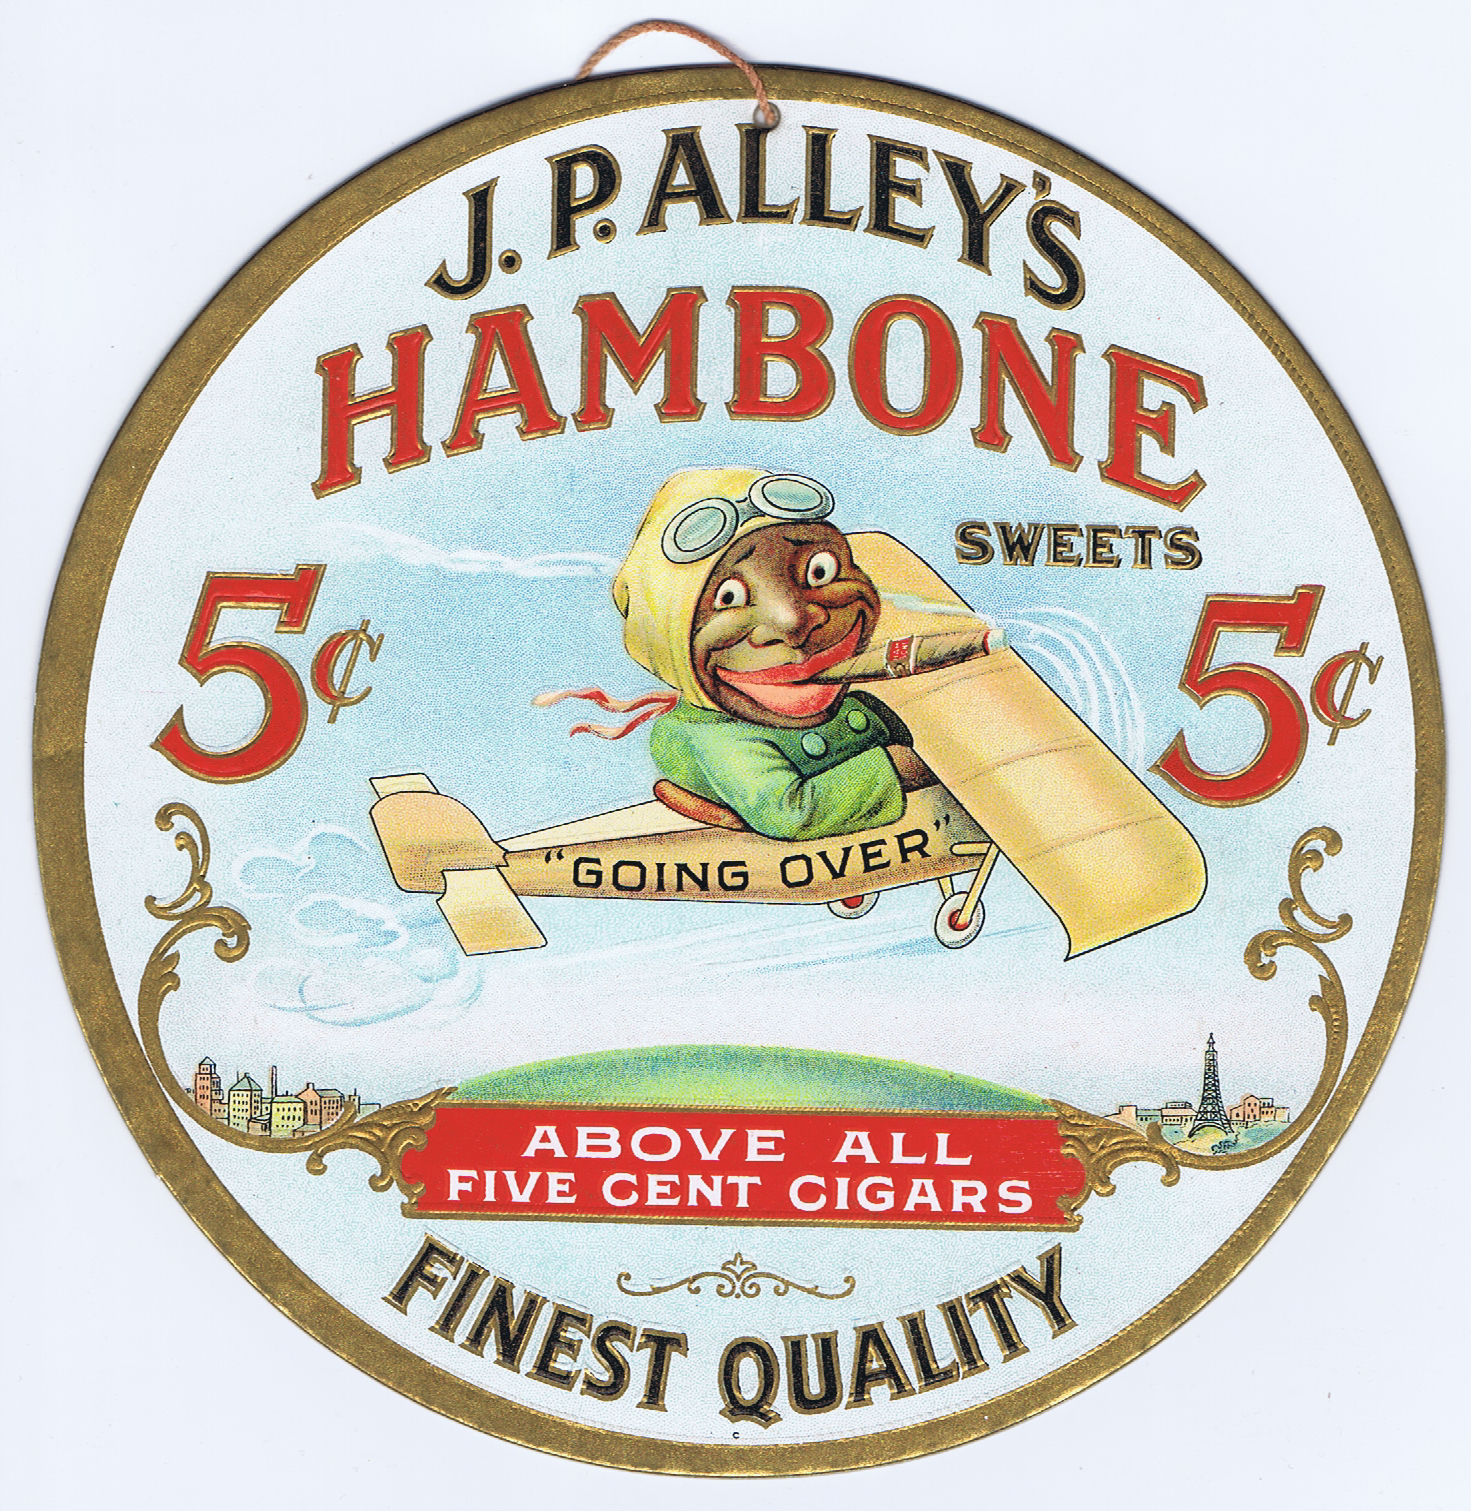 P0627 J. P. ALLEY'S HAMBONE SWEETS 5¢ ABOVE ALL FIVE CENT CIGARS